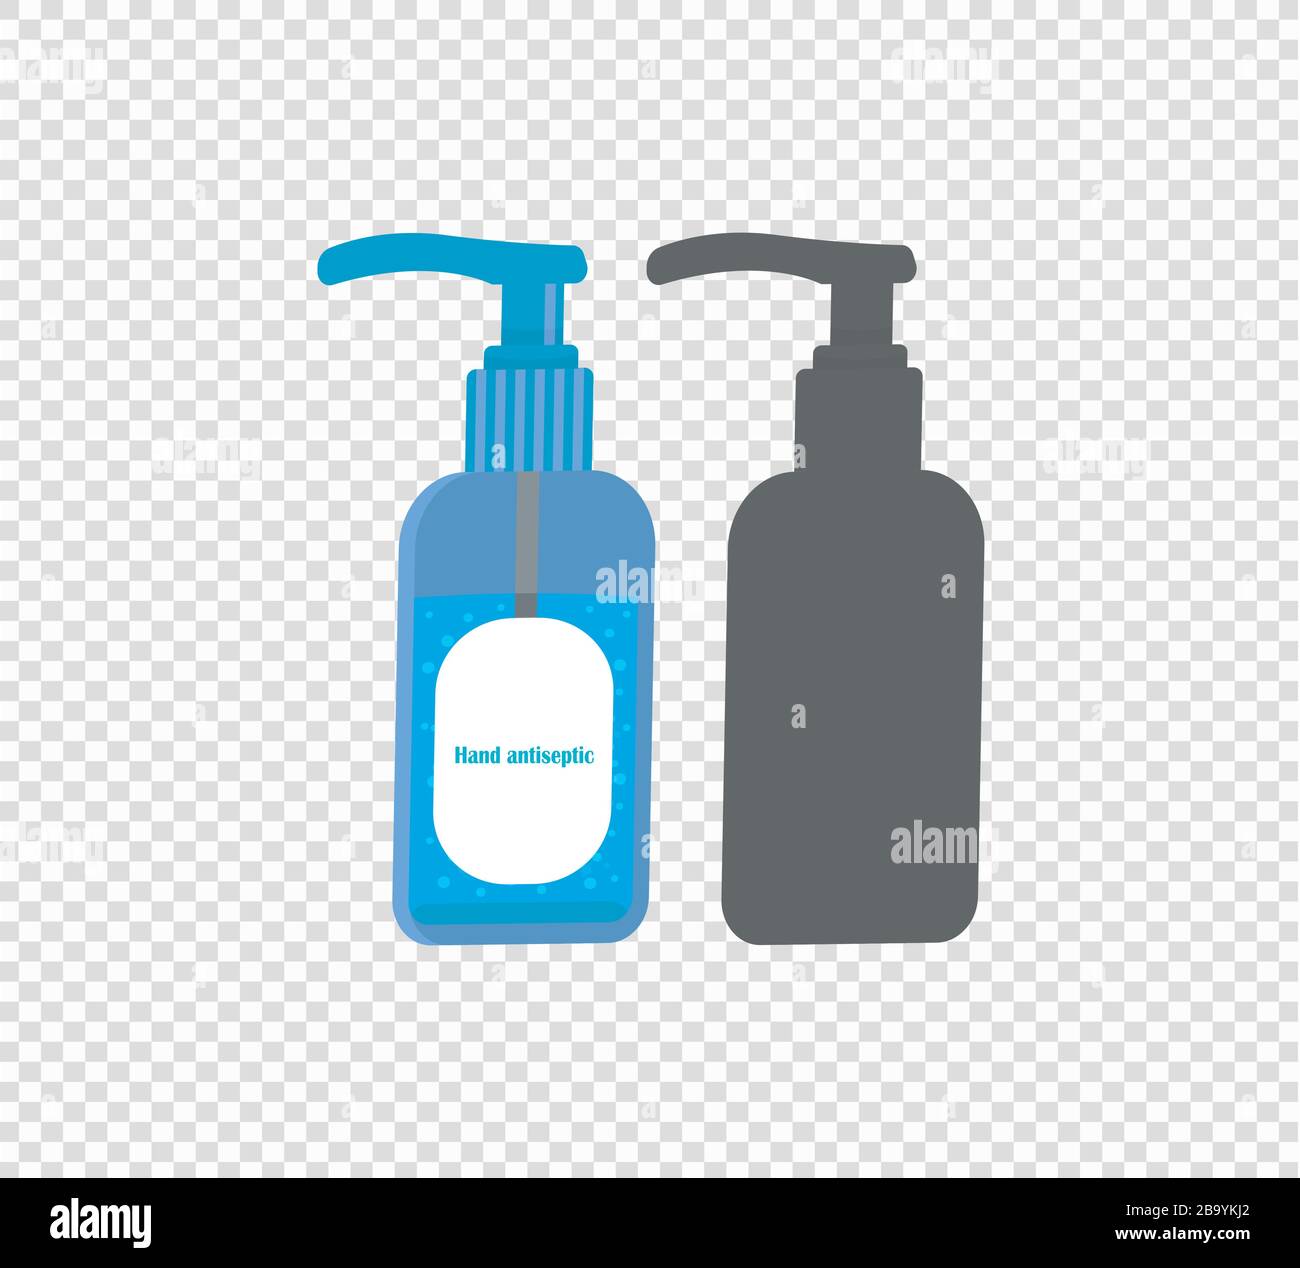 Jar with dispenser actiseptic, sanitizer and silhouette vector jars with dispenser Stock Vector